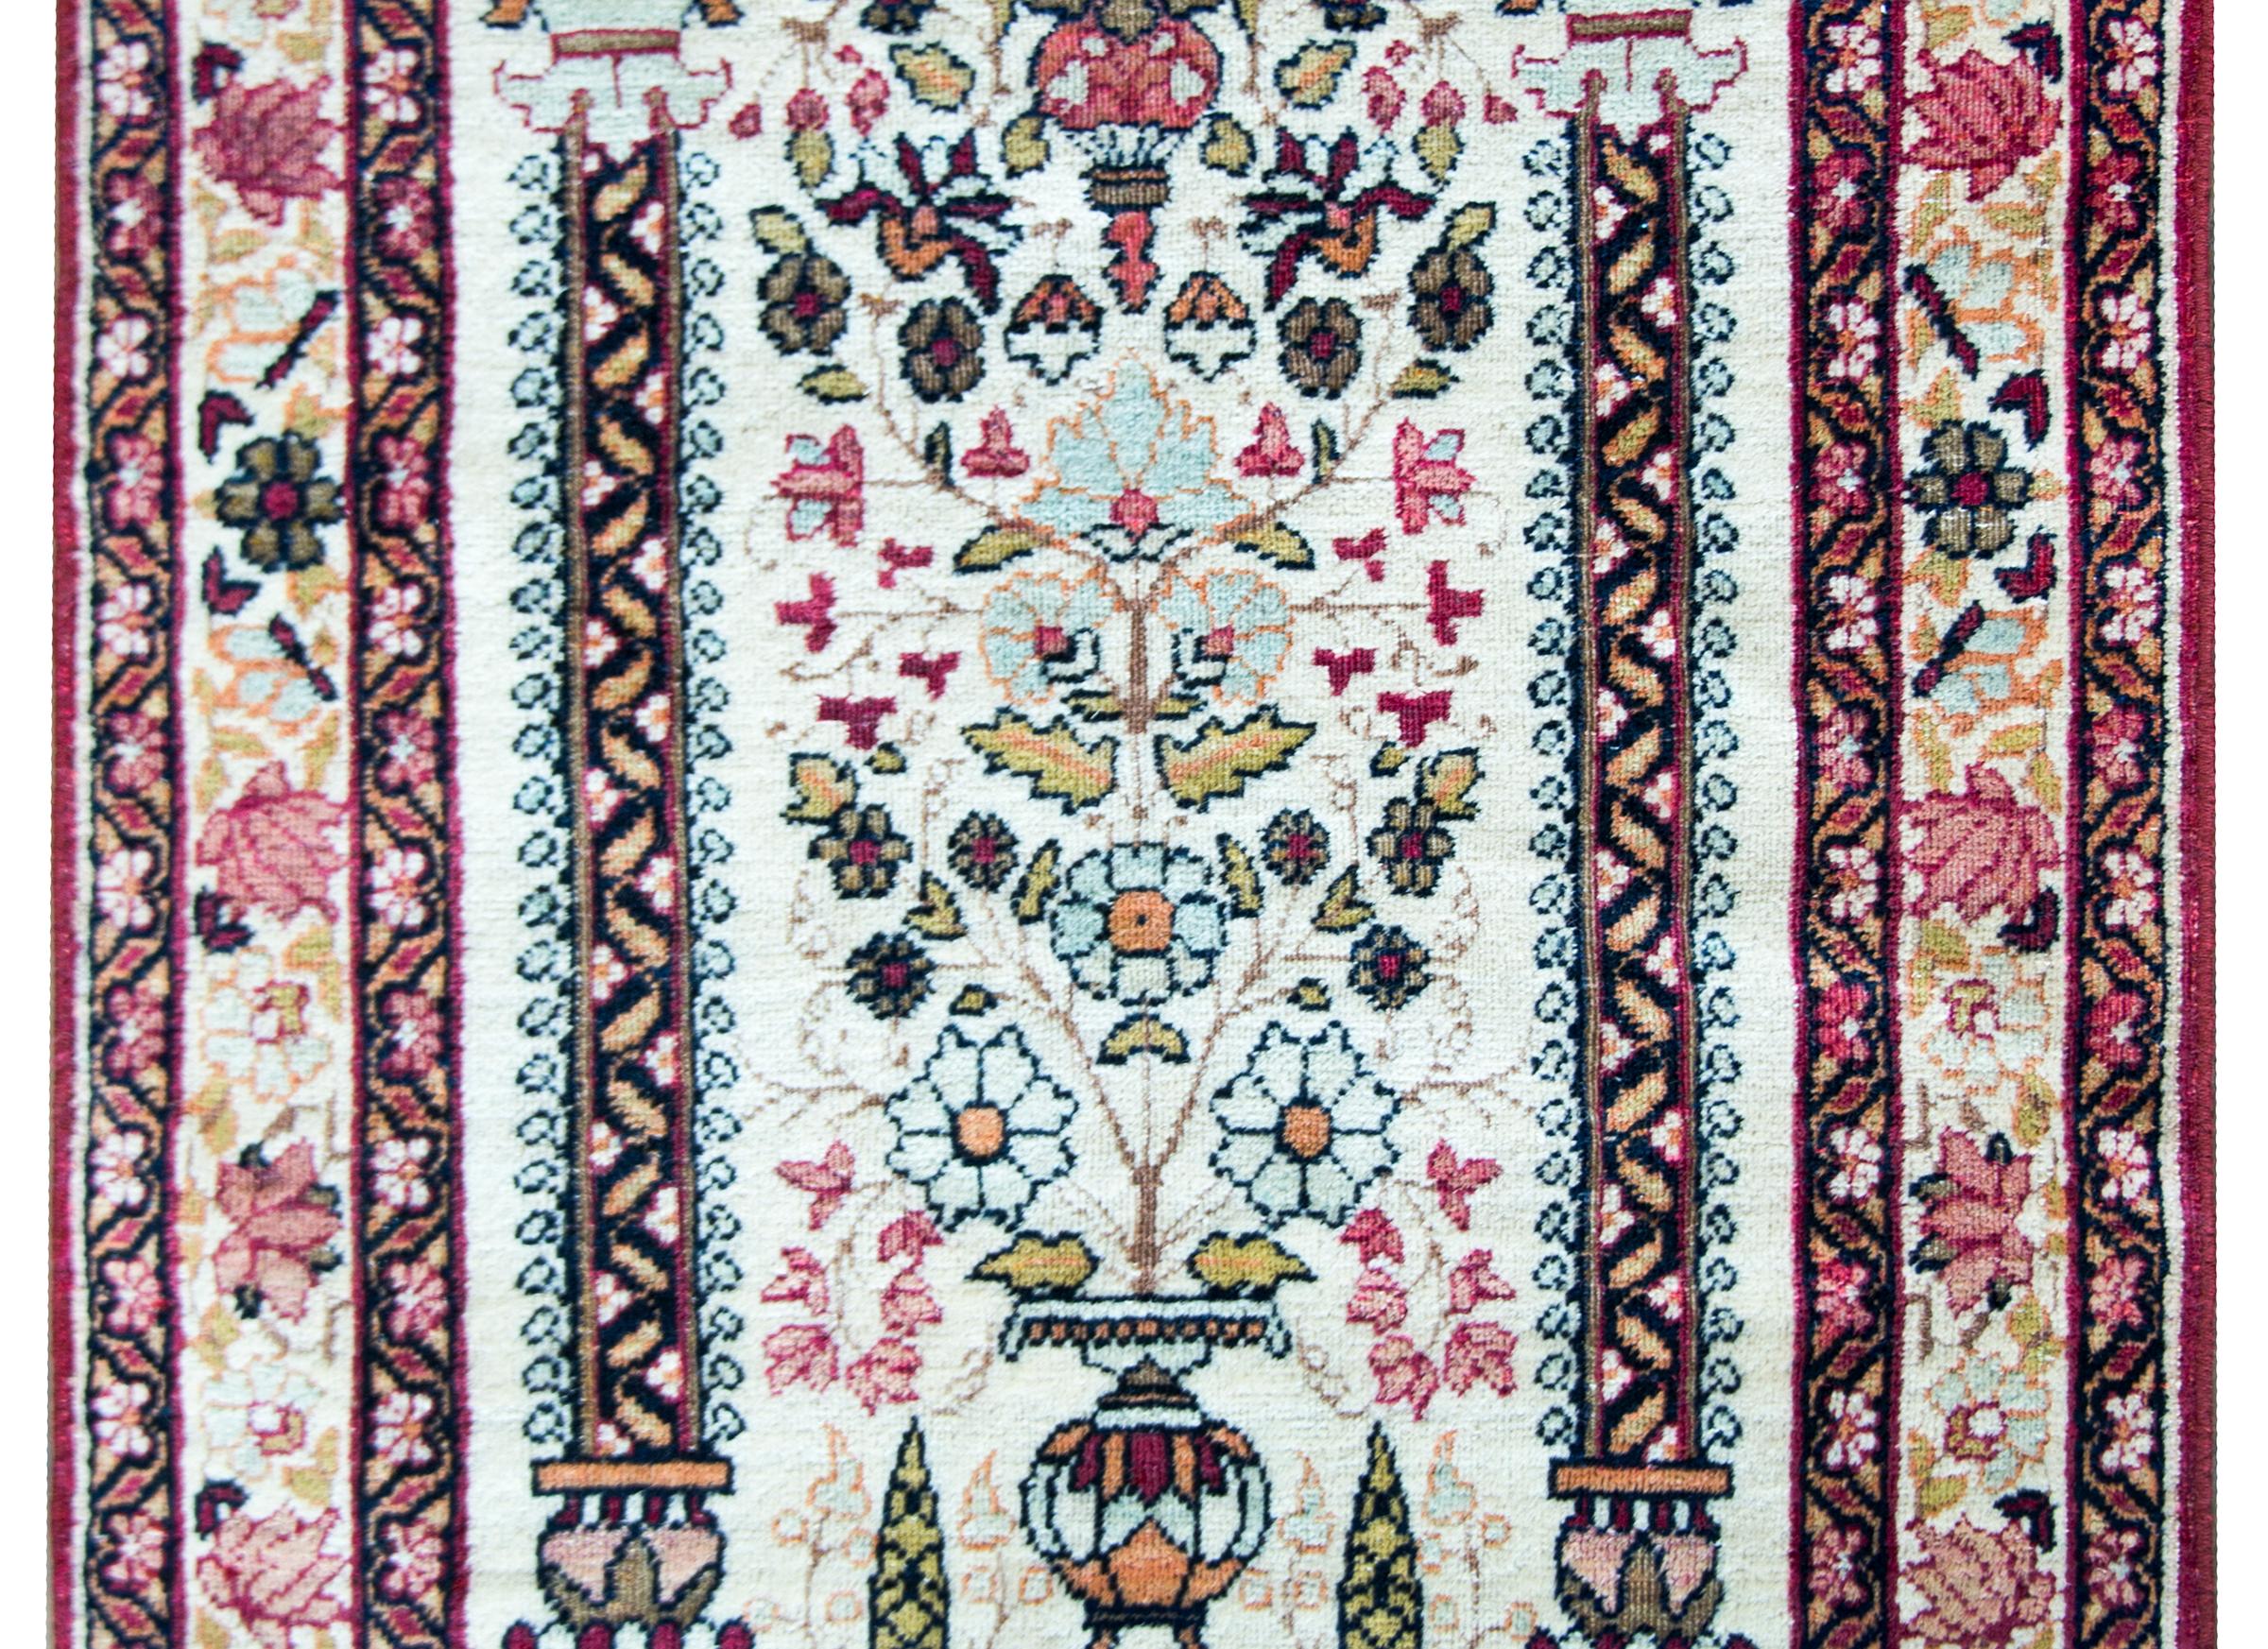 A wonderful early 20th century Persian Kirman rug with a vibrant central tree-of-life motif with several varieties of flowers potted in a vase and flanked by a pair of architectural columns, and all completely surrounded by a wonderful border